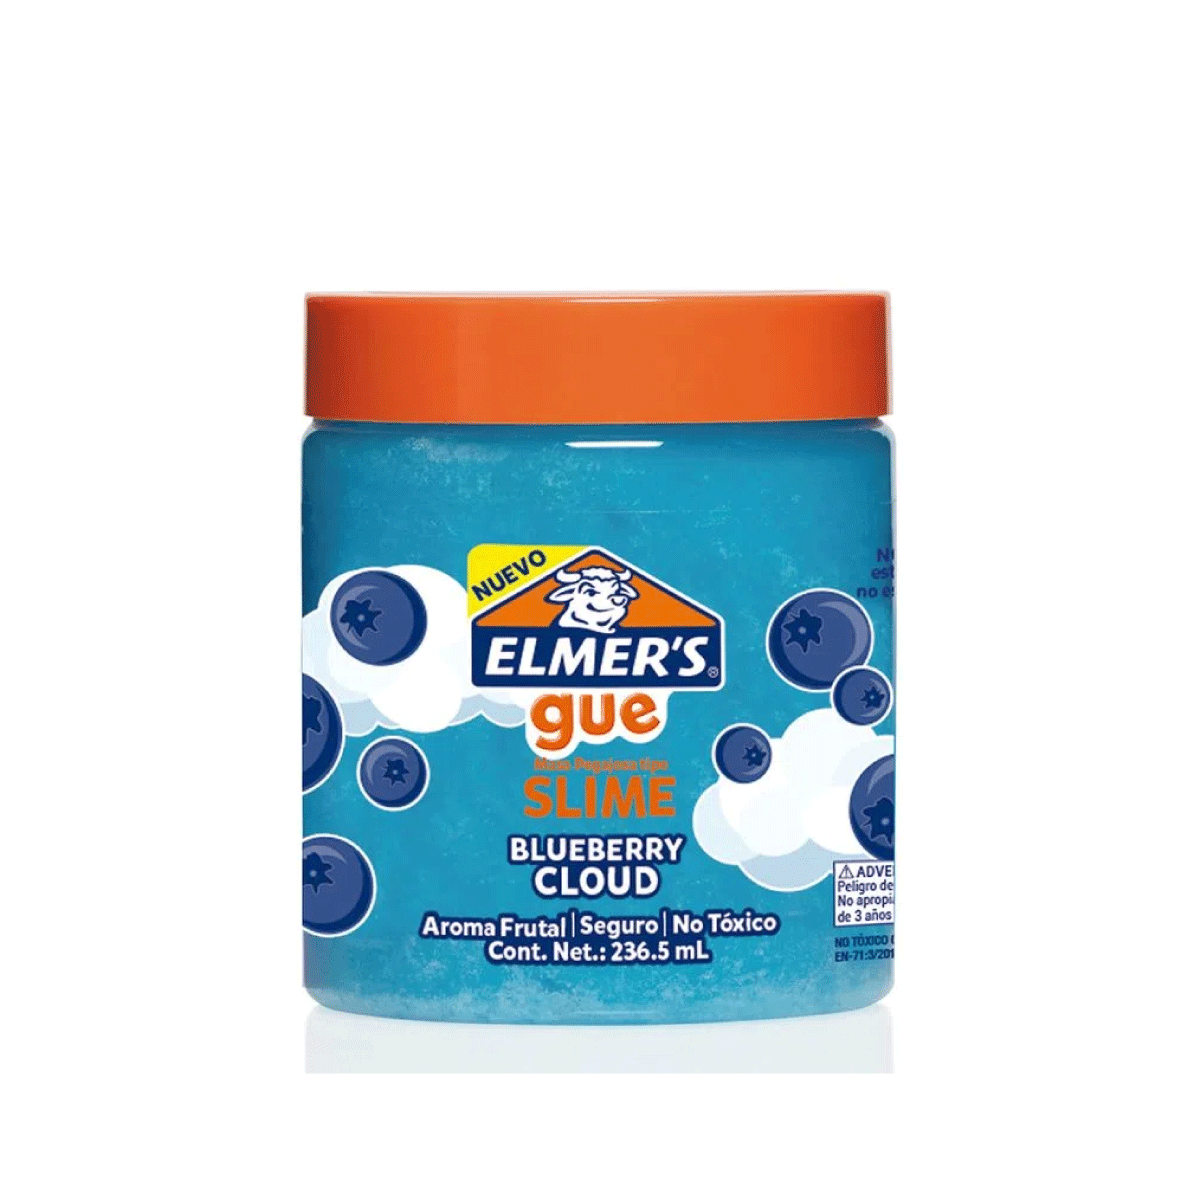 Elmers slime pre-hecho cloud blueberry